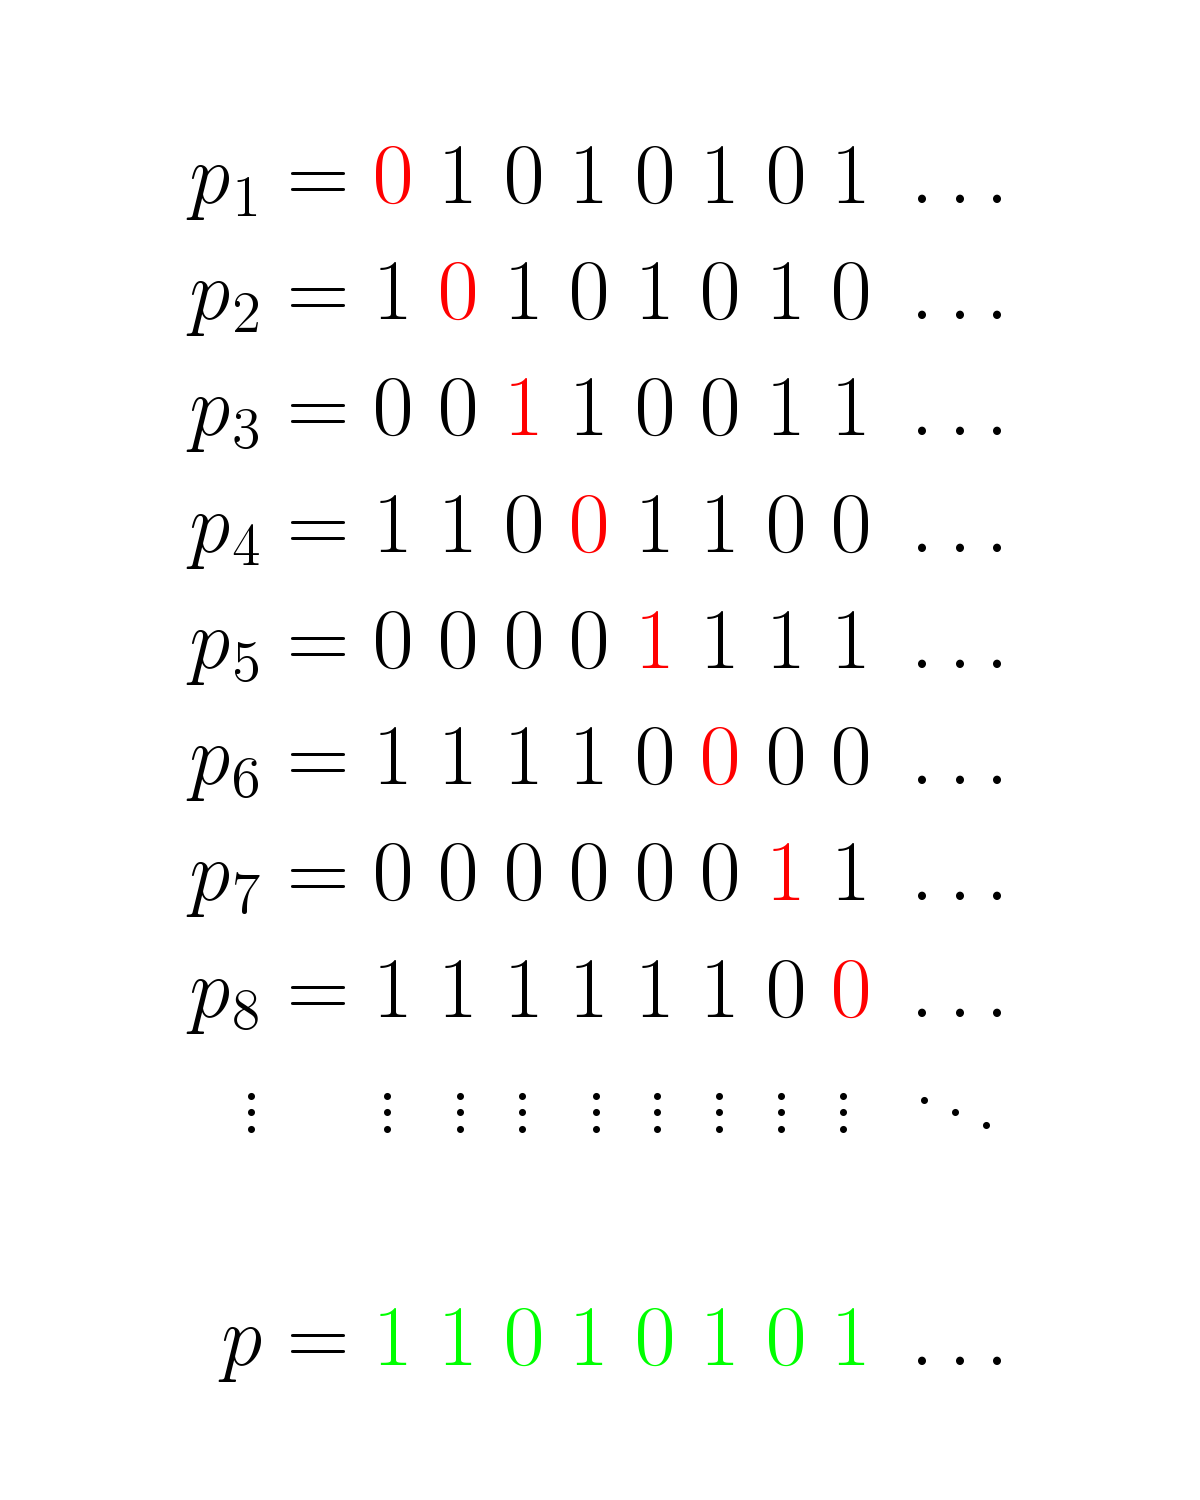 Illustration of a diagonal proof, showing the bit of each sequence that is flipped to make a new sequence that is not on the original list